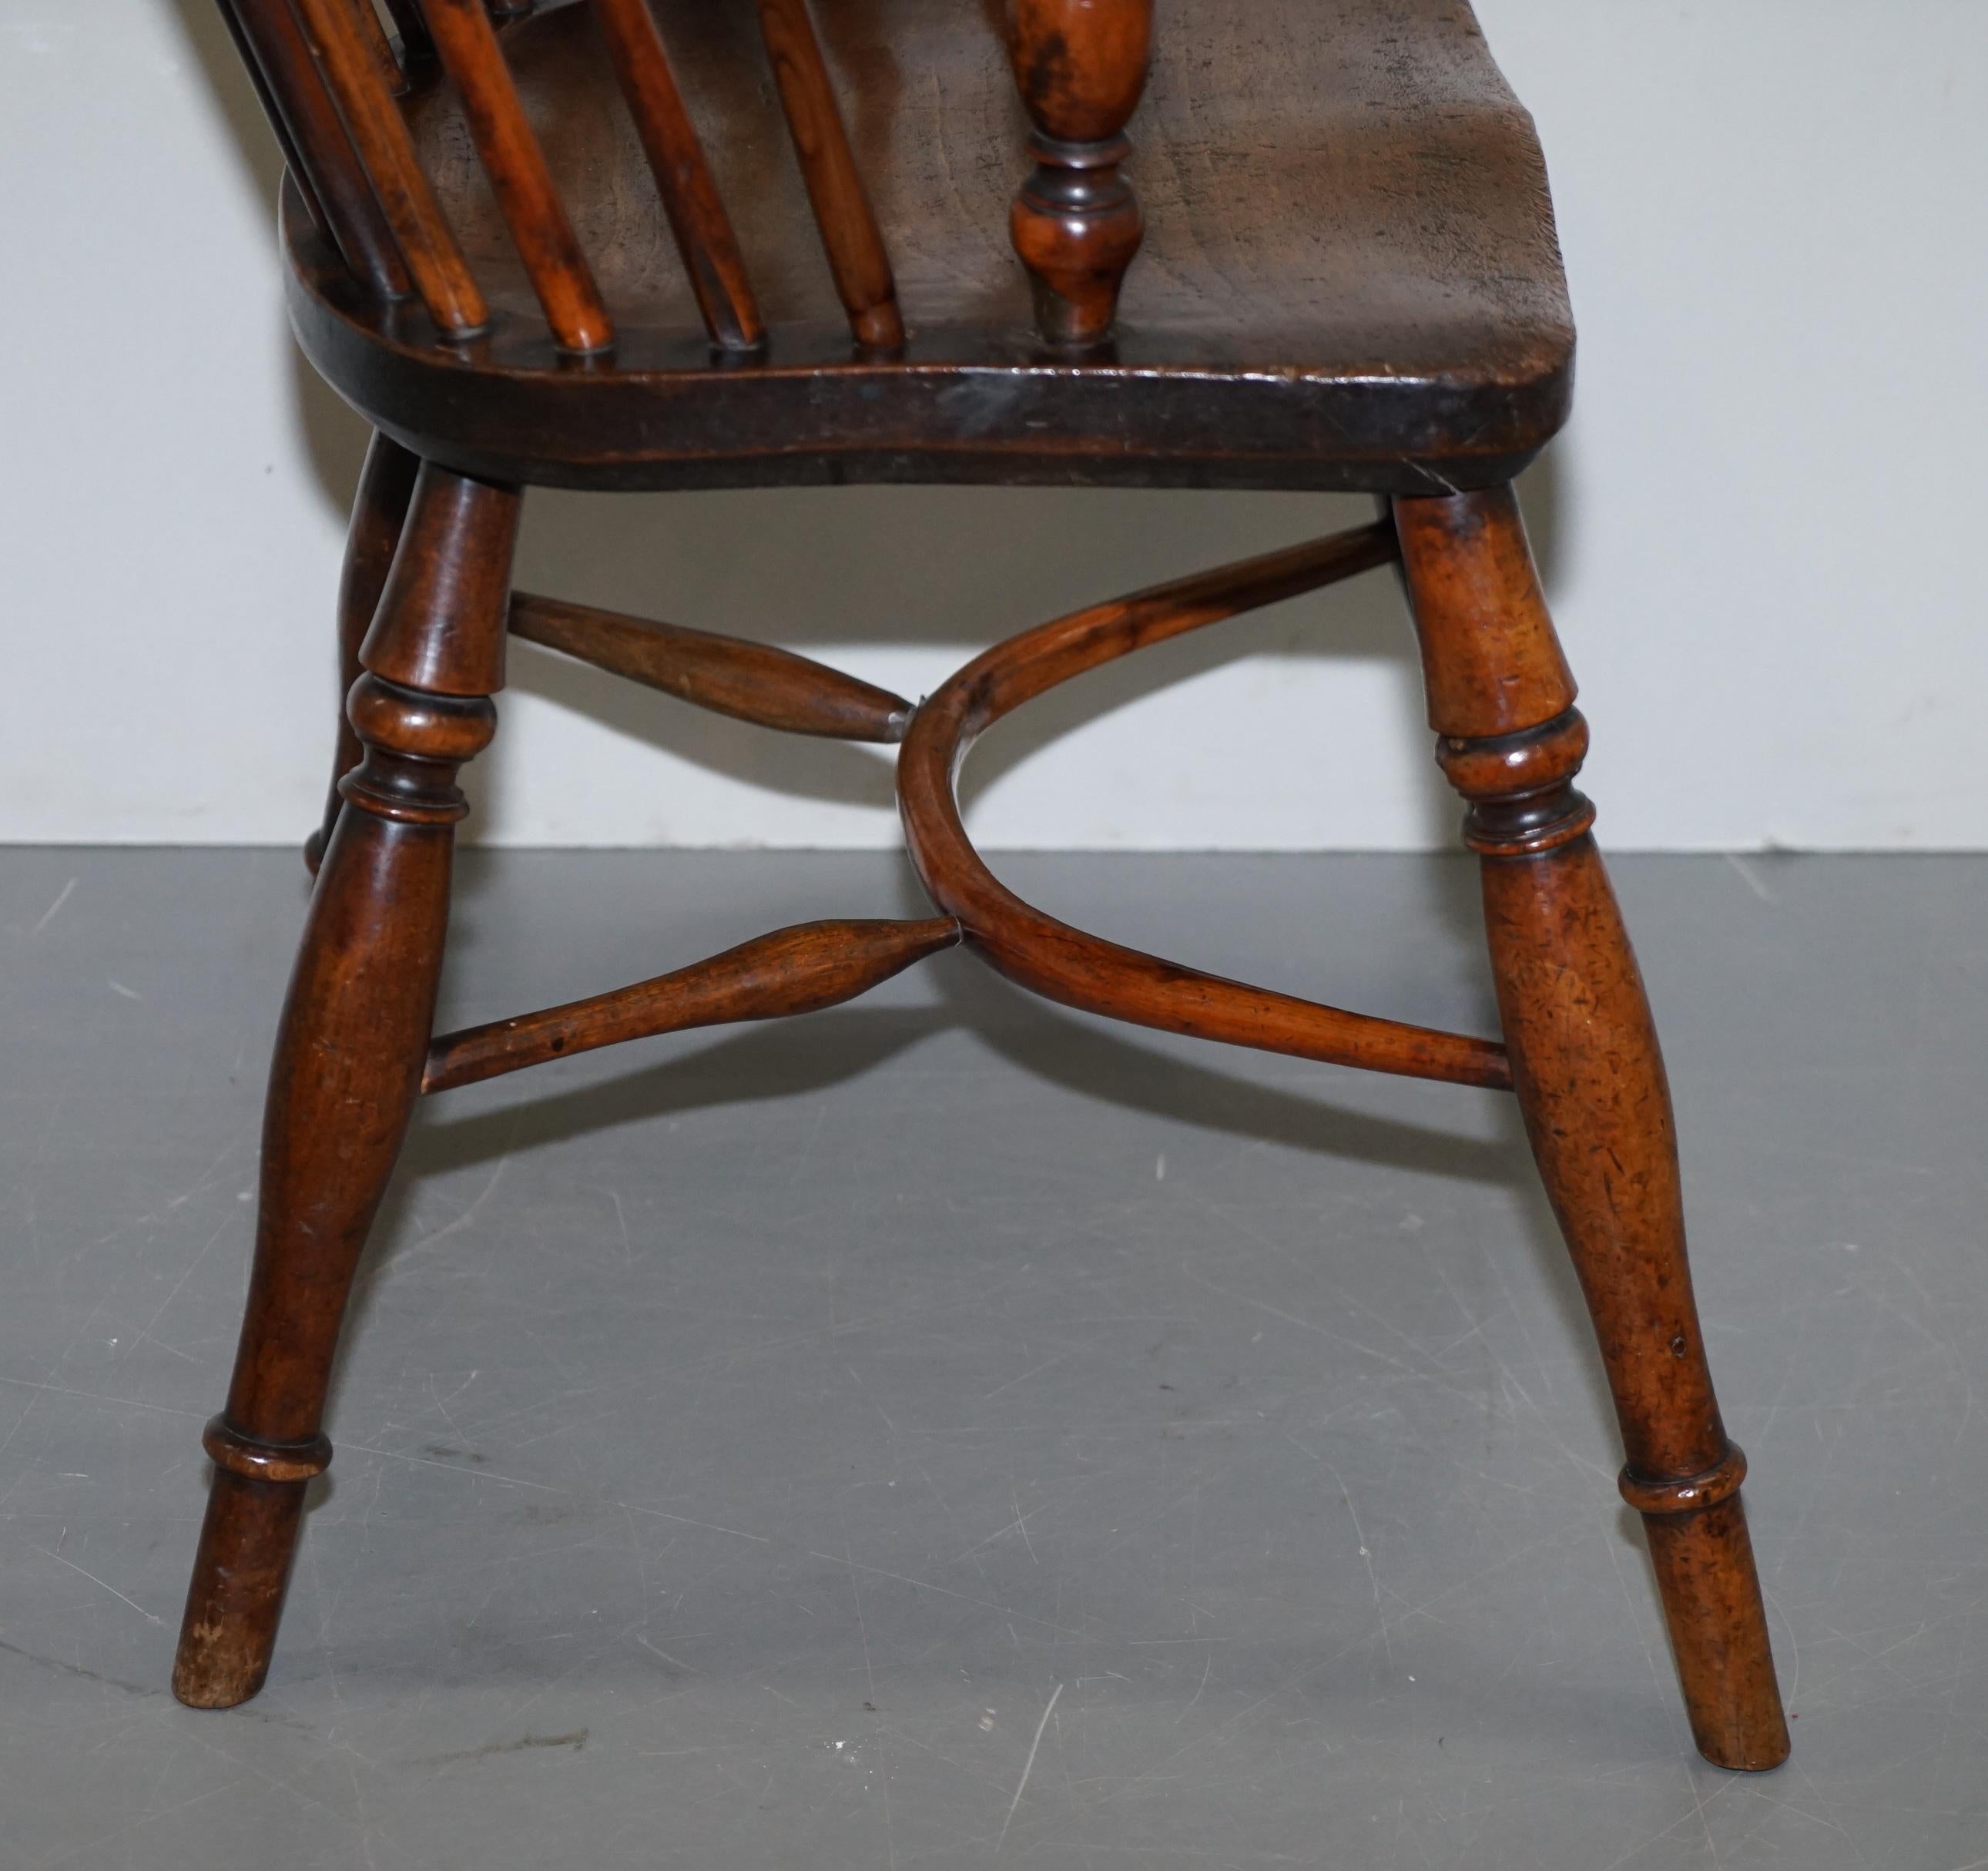 1 of 6 Burr Yew Wood Windsor Armchairs circa 1860 English Countryhouse Furniture For Sale 7